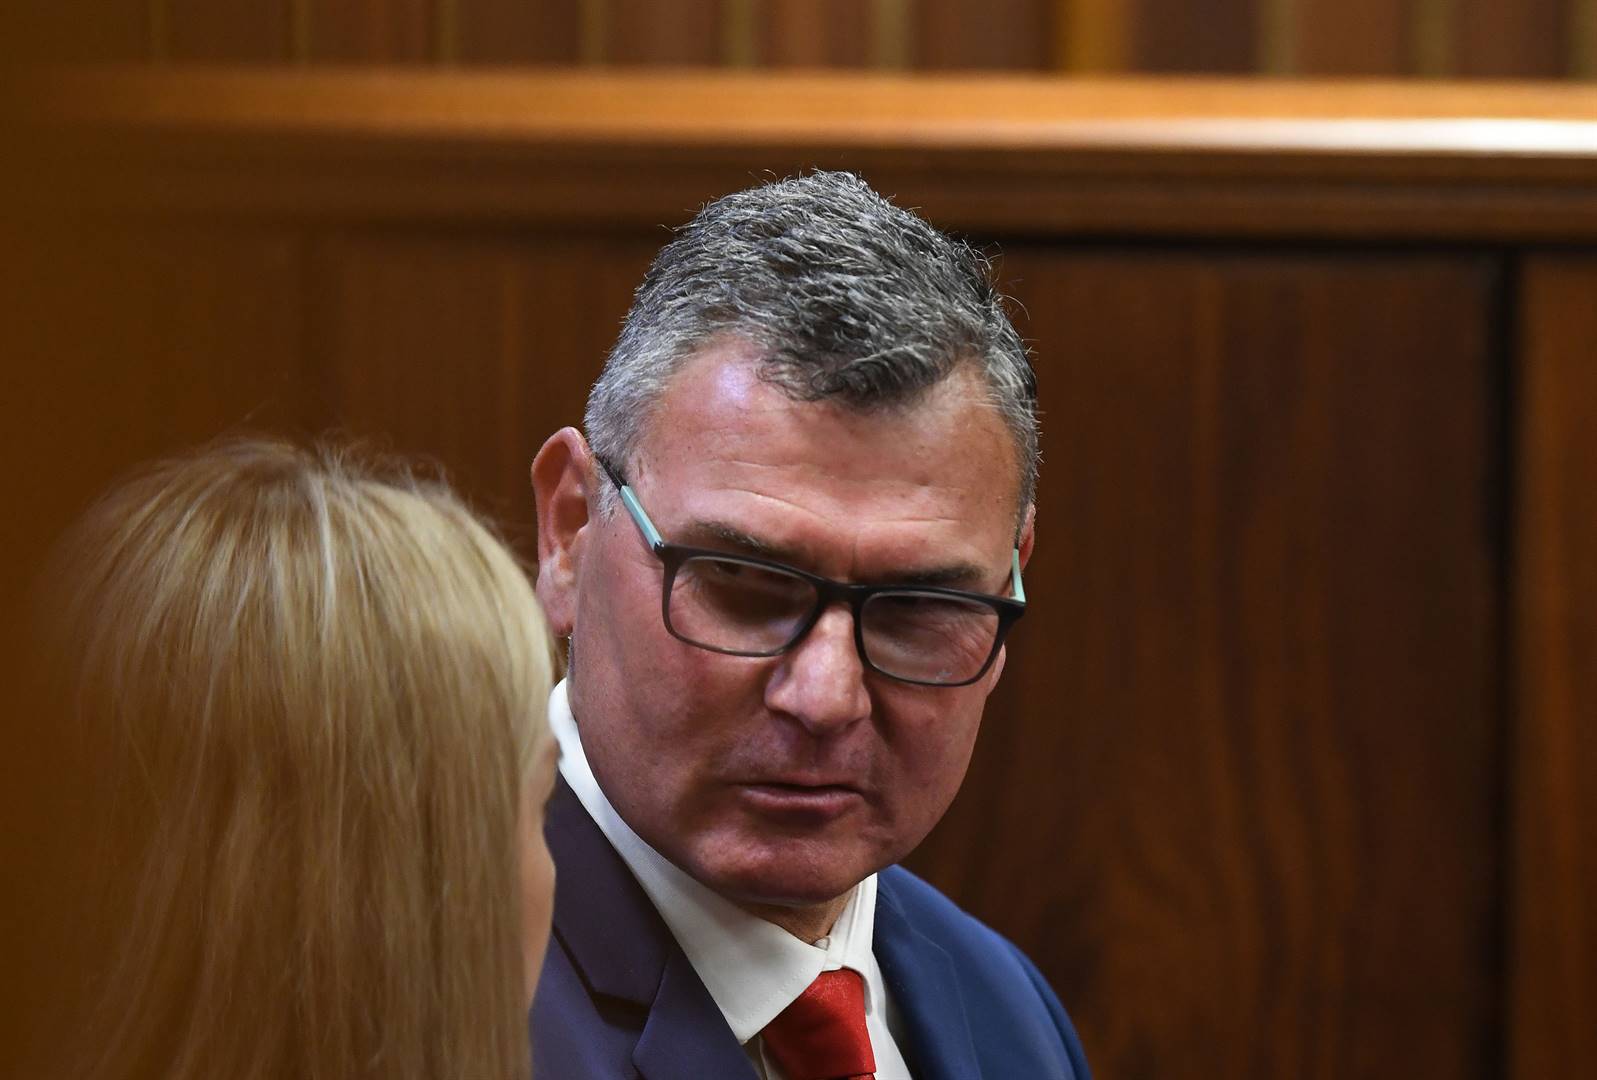 Arnold Terblanche in court.